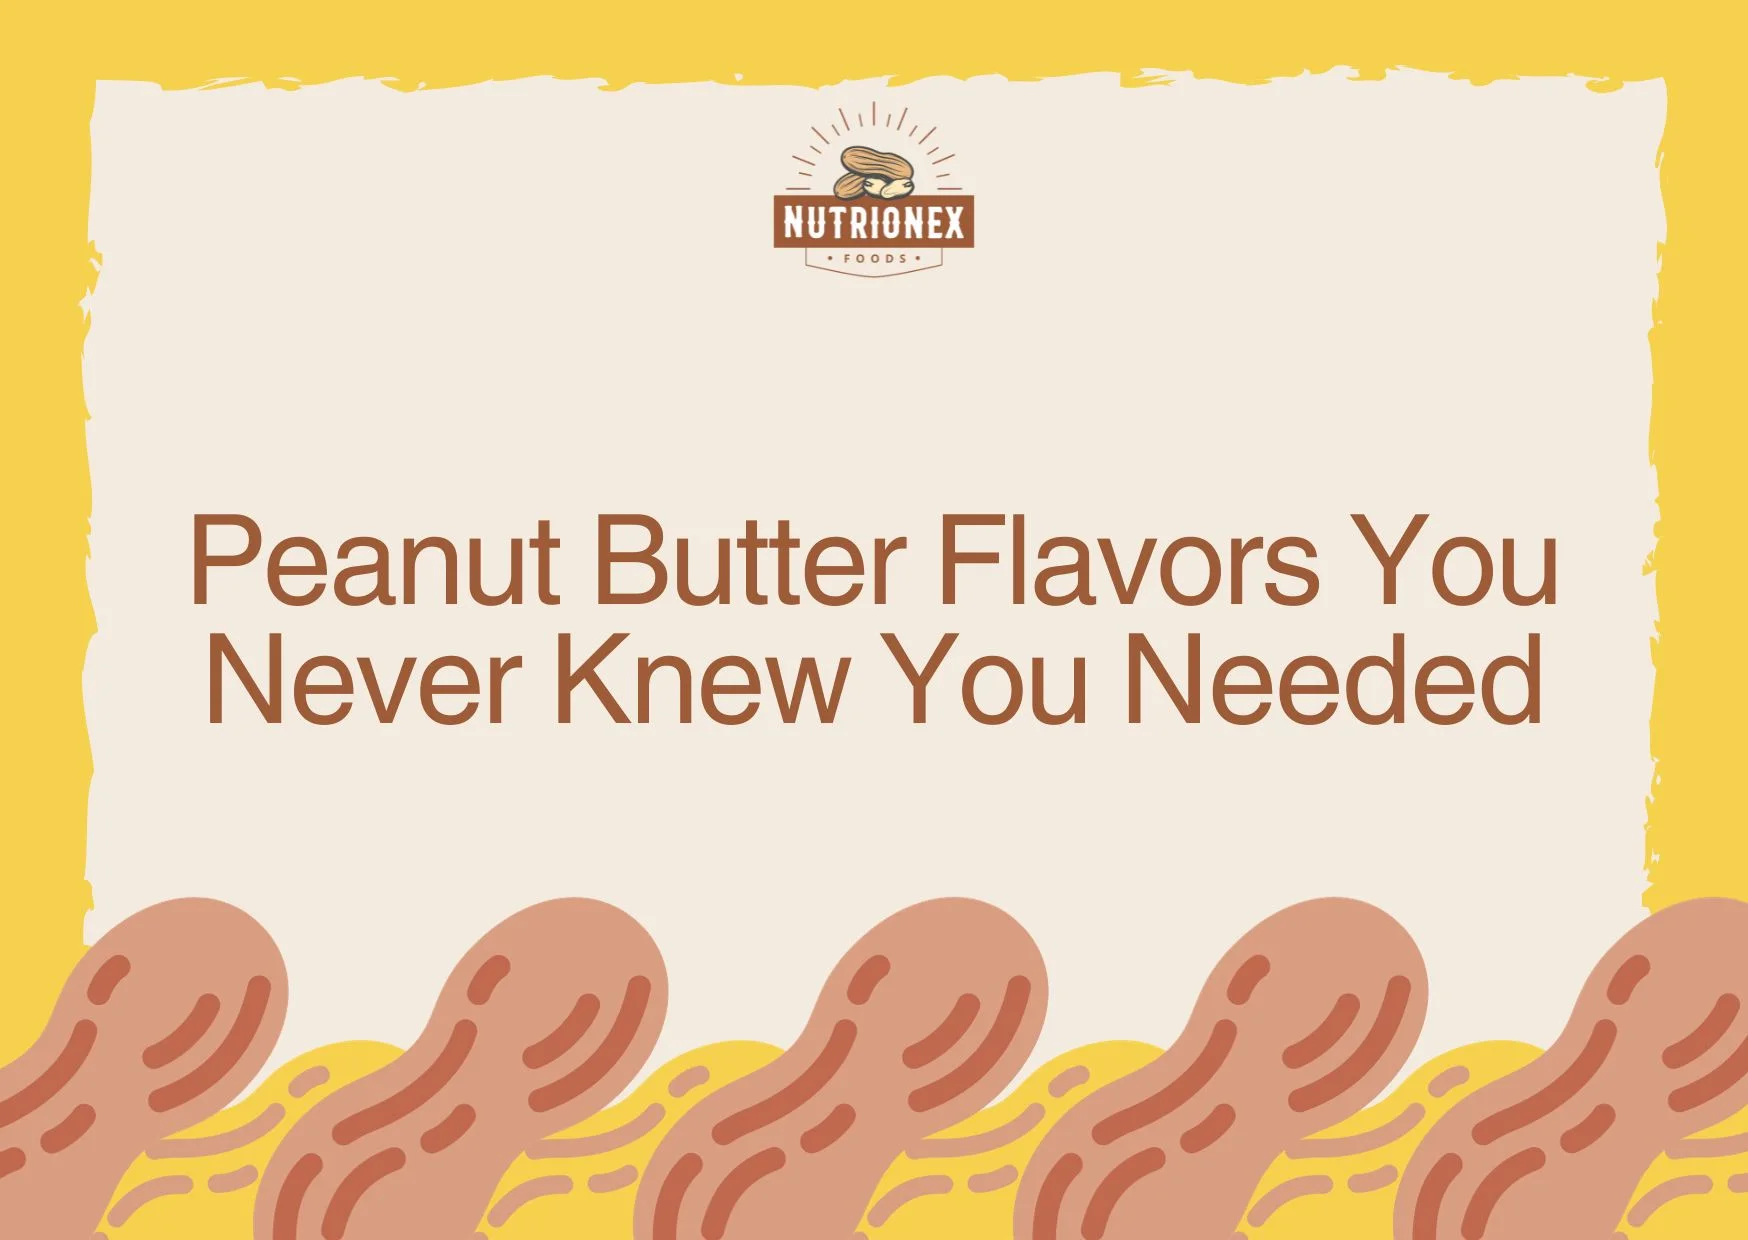 Peanut Butter Flavours You Never Knew You Needed